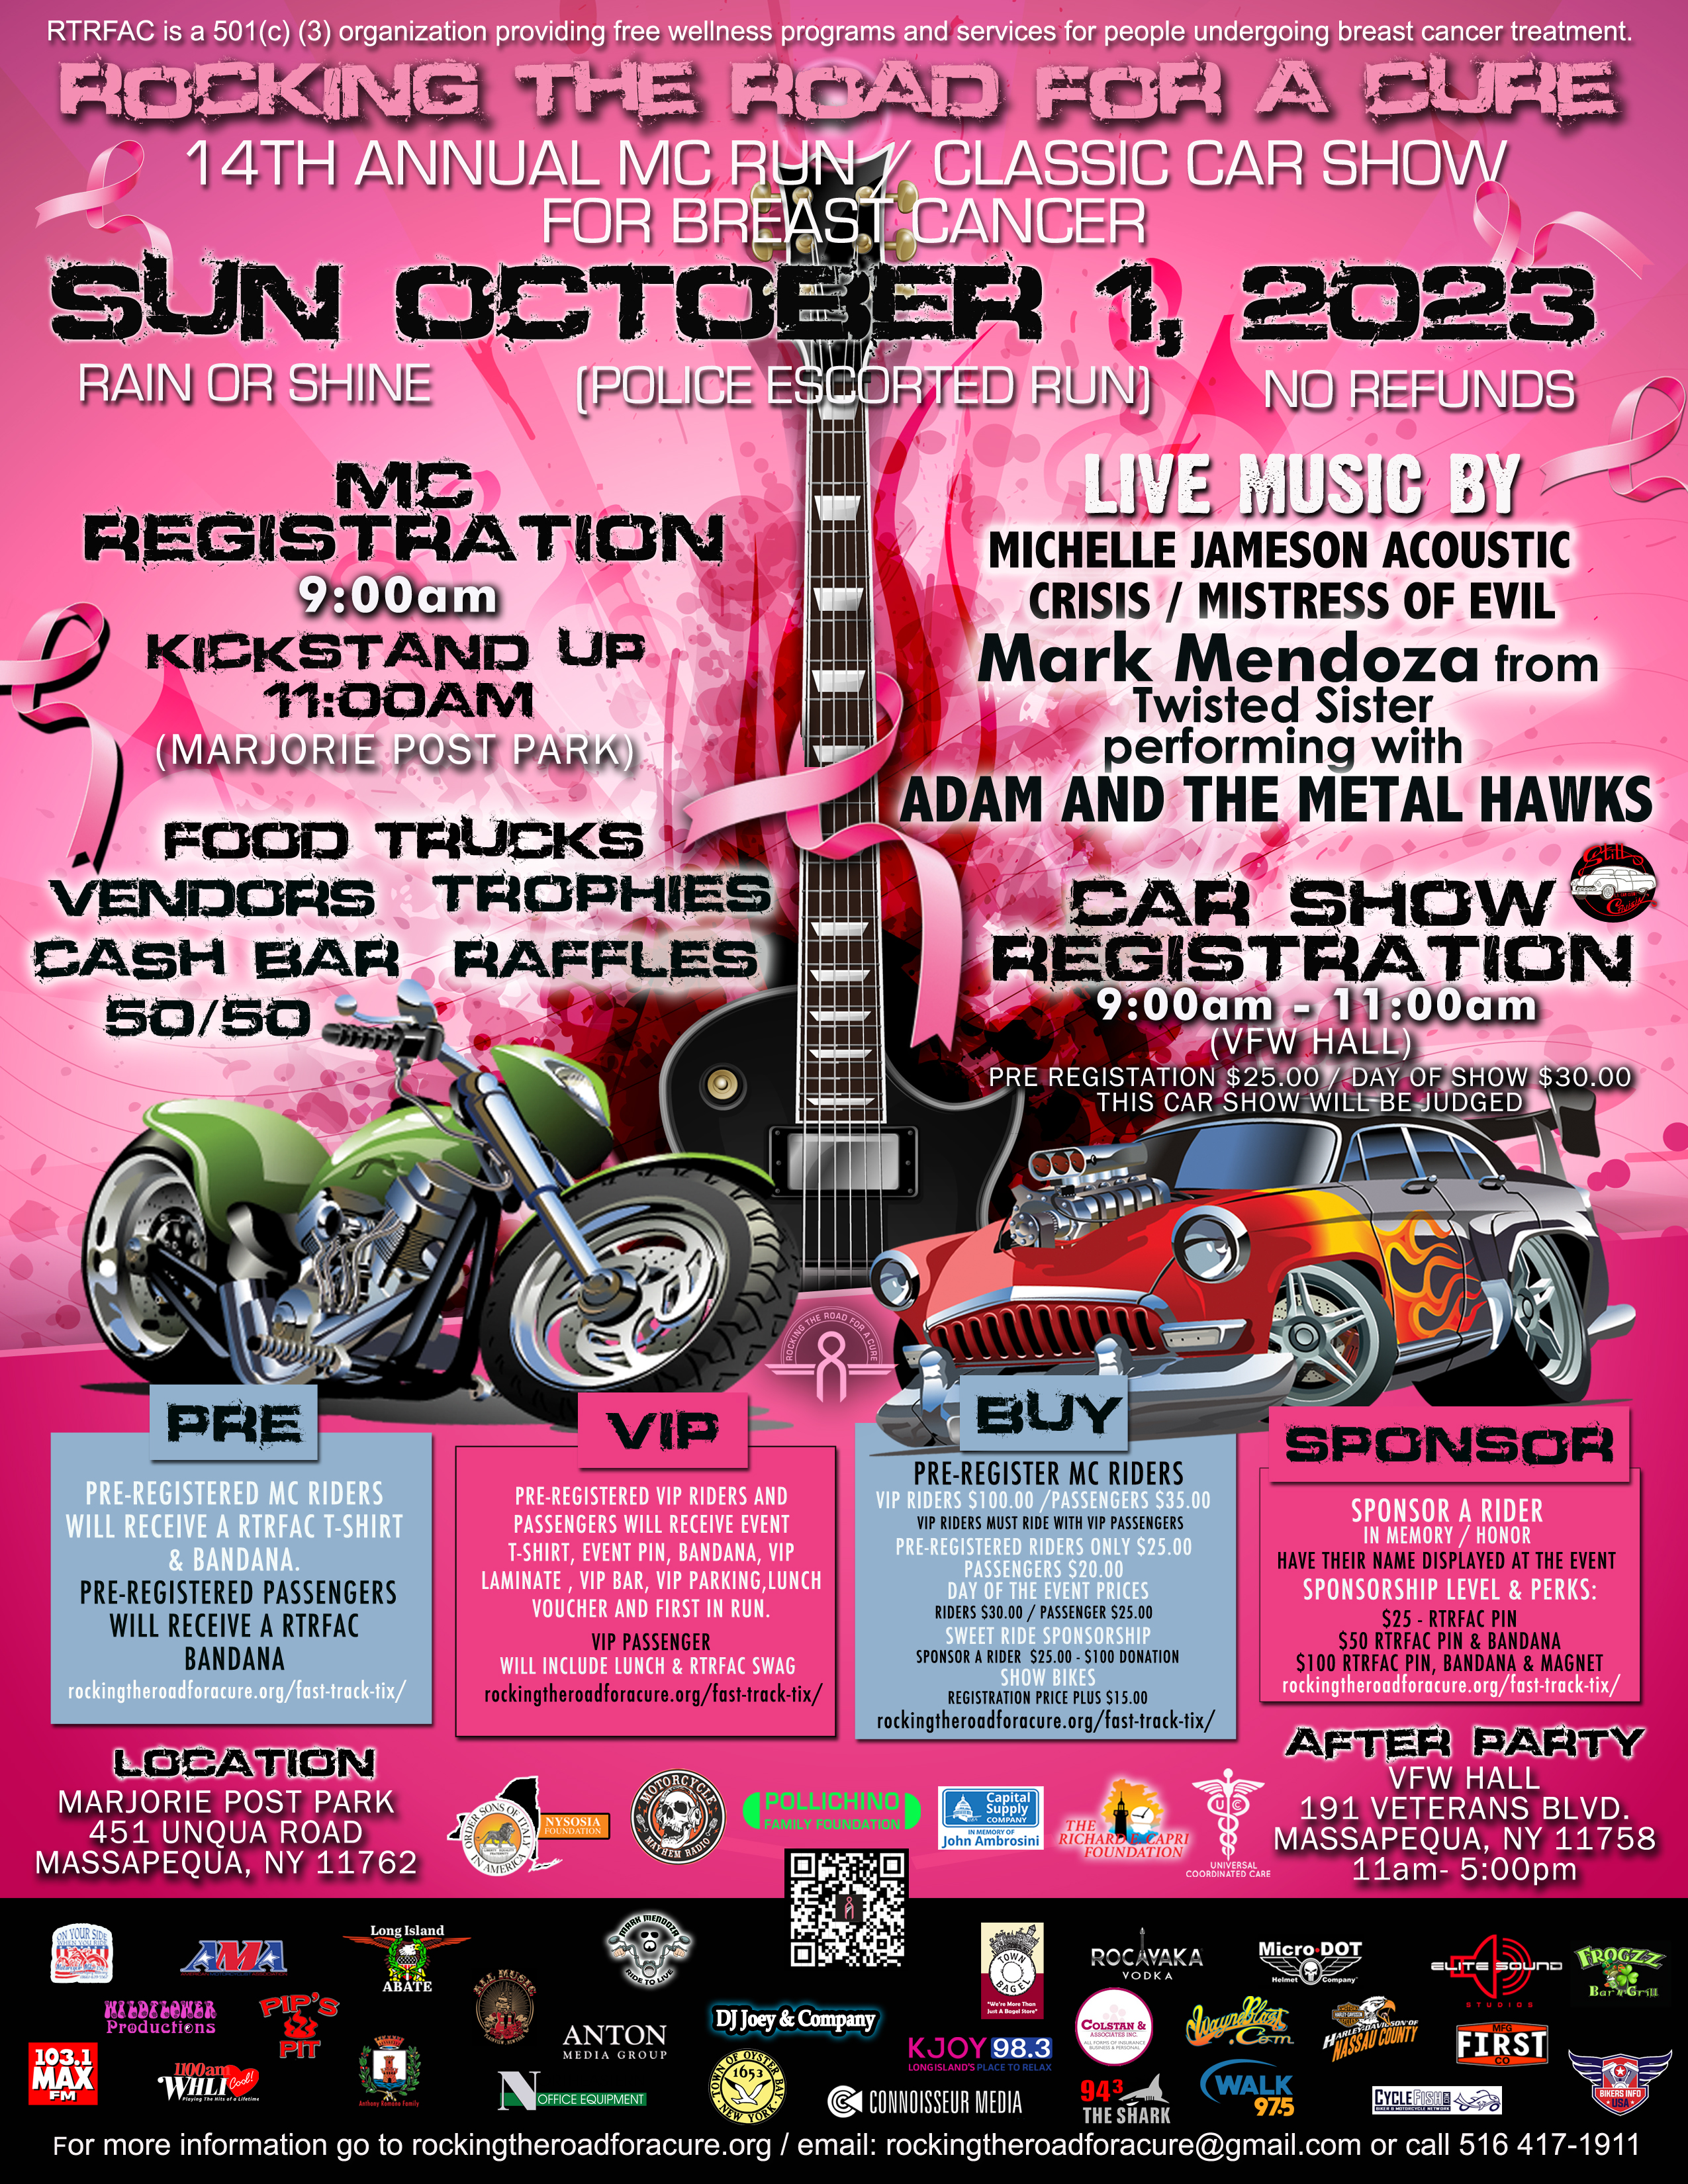 14th Annual Motorcycle Run/Classic Car Show for breast cancer - Lido Beach, NY - October 1, 2023